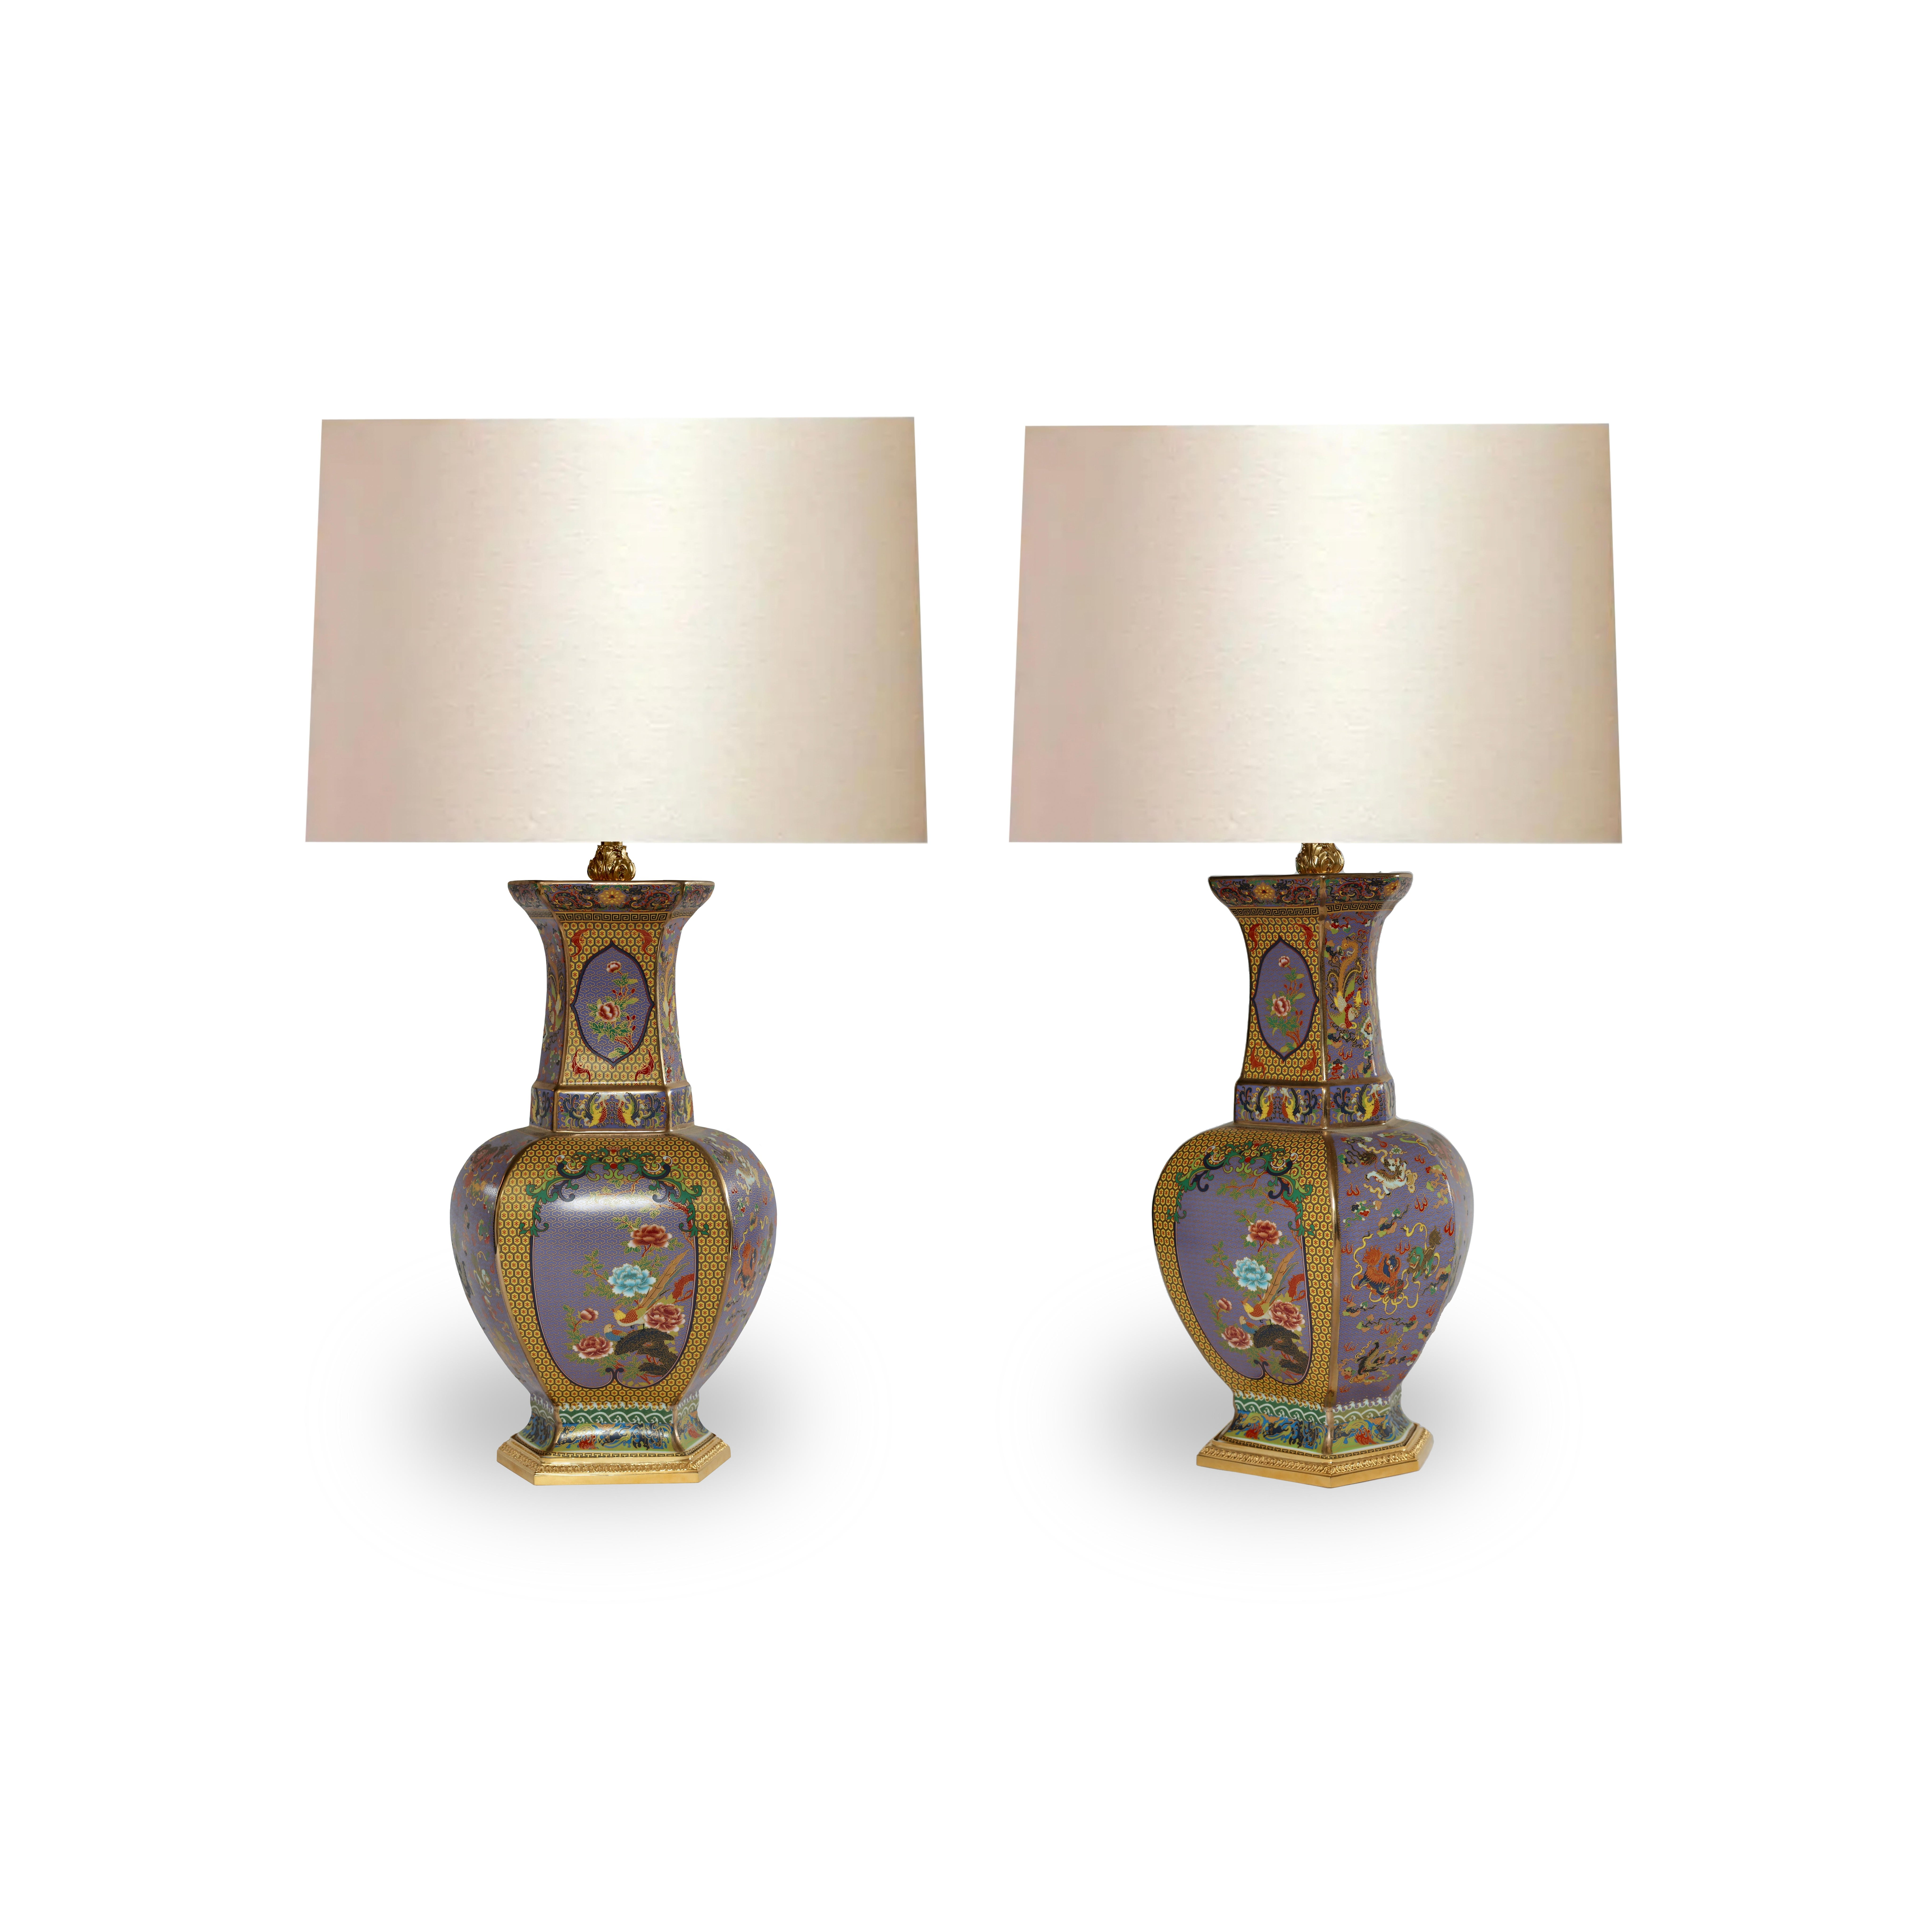 Pair of ormolu mount famille verte porcelain lamps.
Each lamp installed two E26 sockets.
To the top of the porcelain vase 20 inch 
Lampshade are not included.